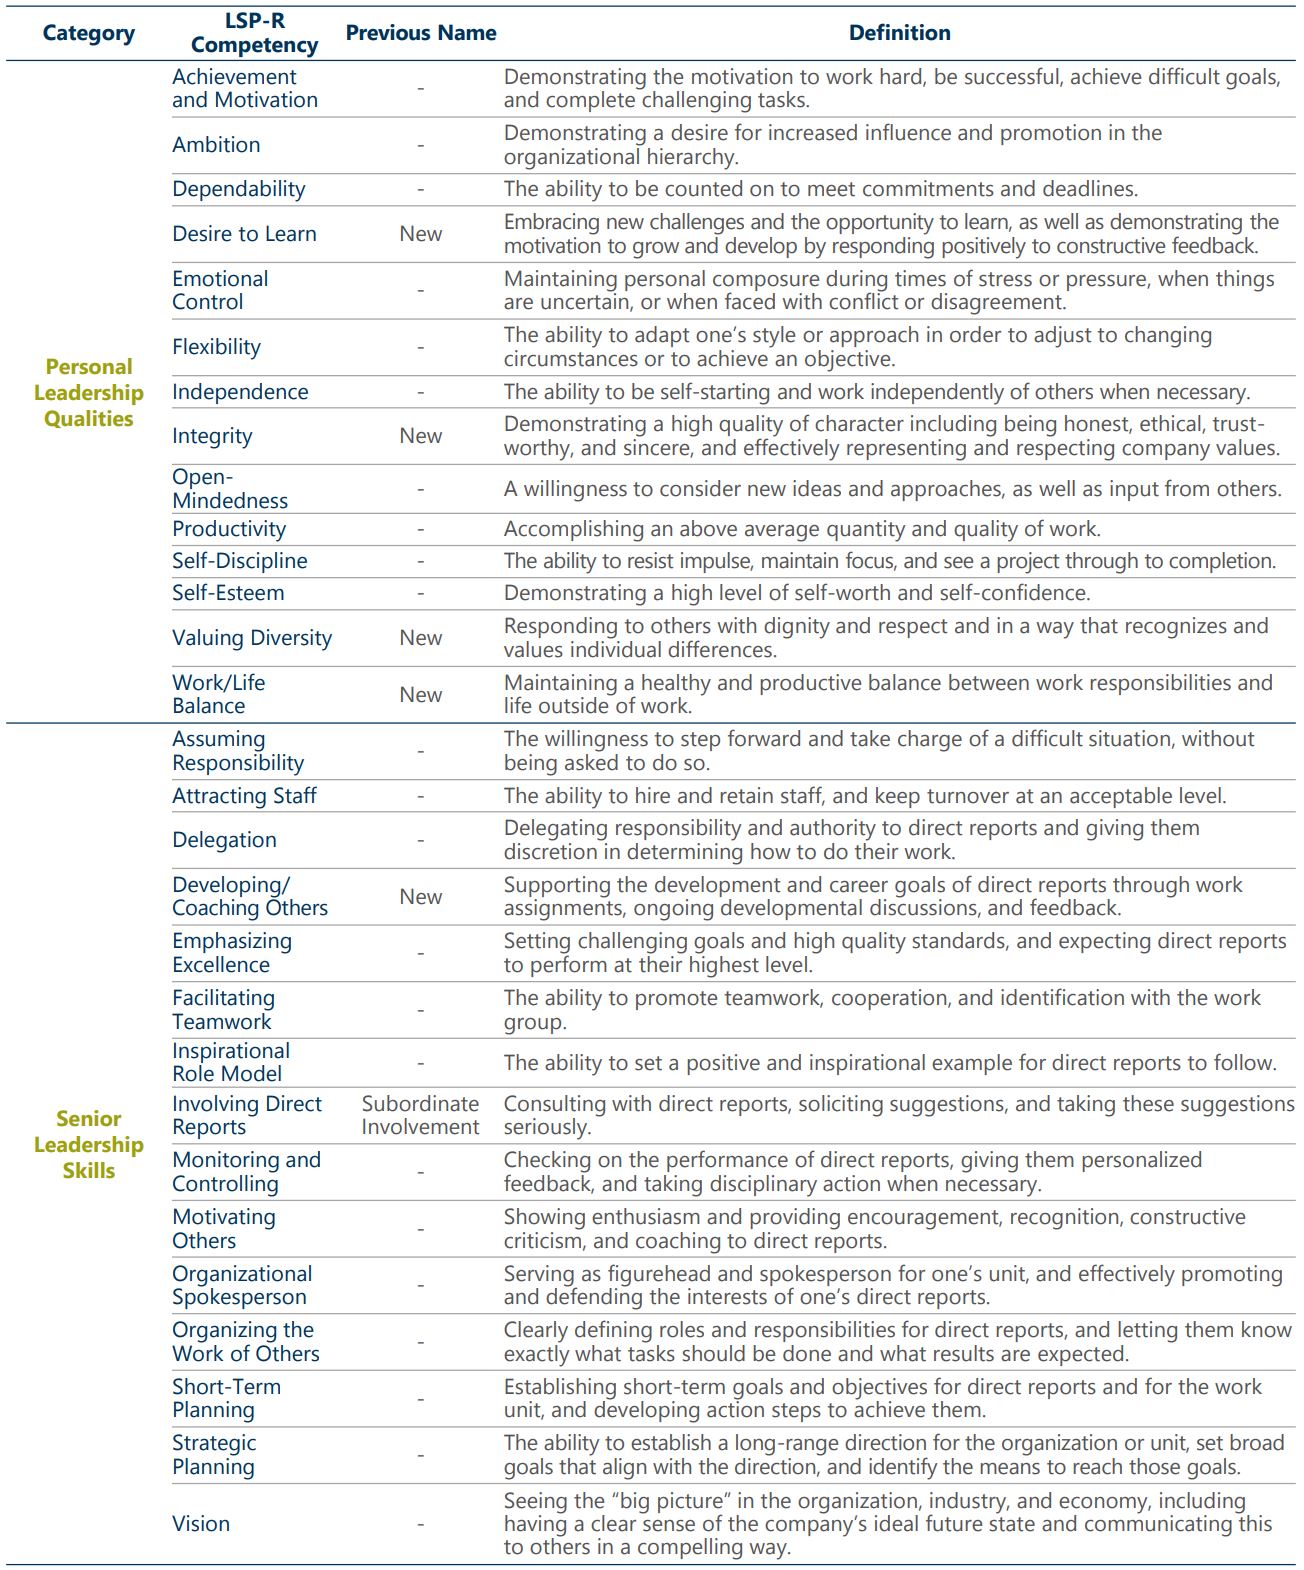 Table of the leadership competencies measured by the LSP-R